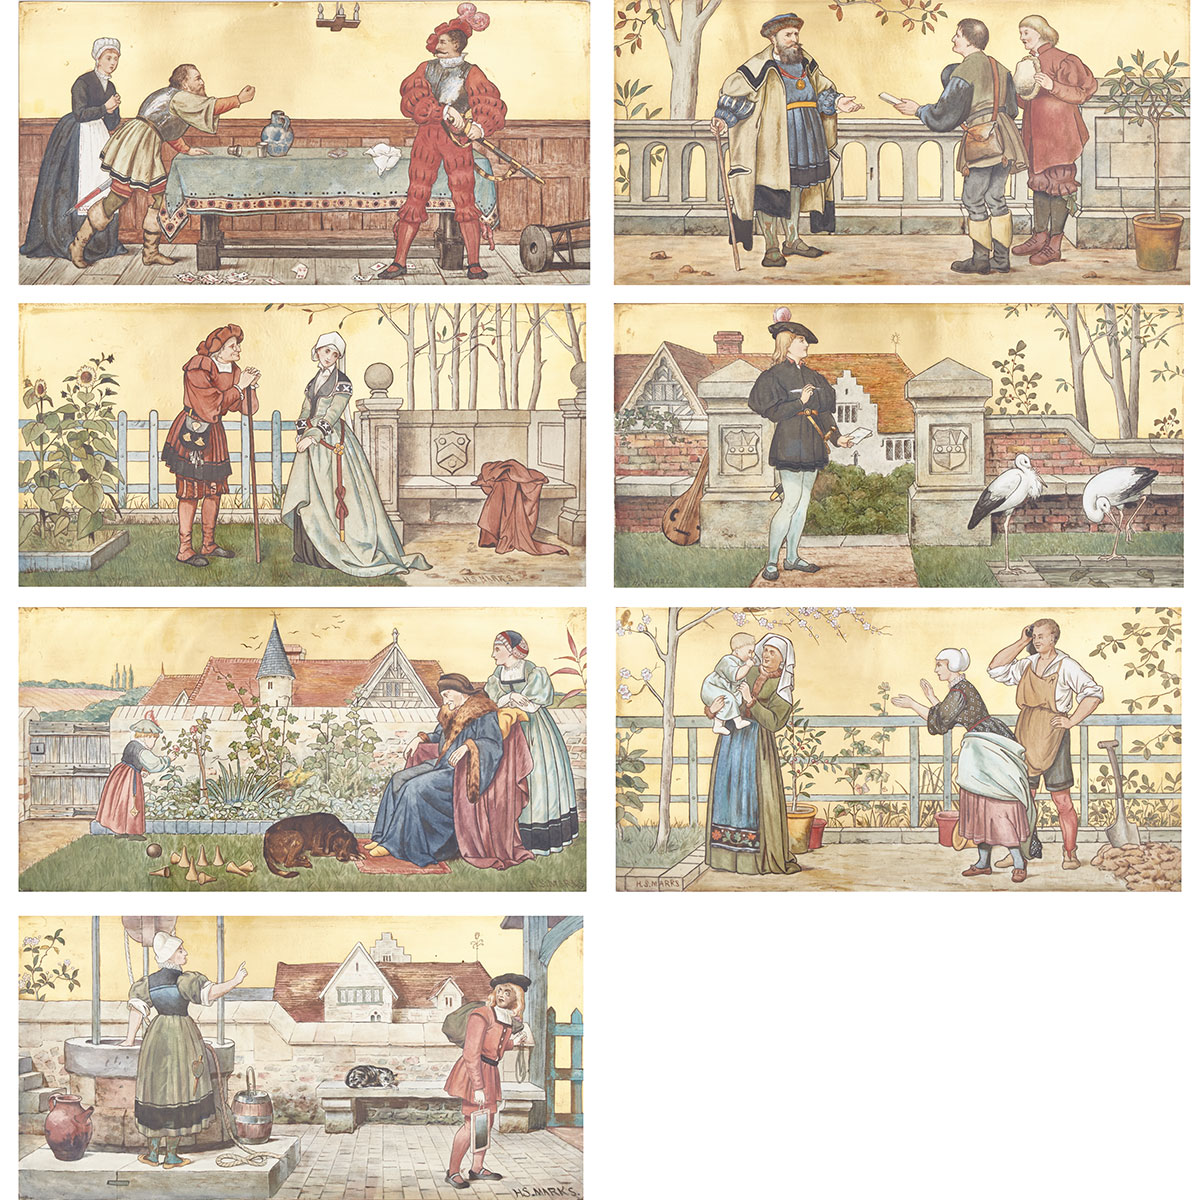 ‘The Seven Ages of Man’, Set of Seven Minton’s Art Pottery Studio Rectangular Plaques, Henry Stacy Marks, c.1873-74